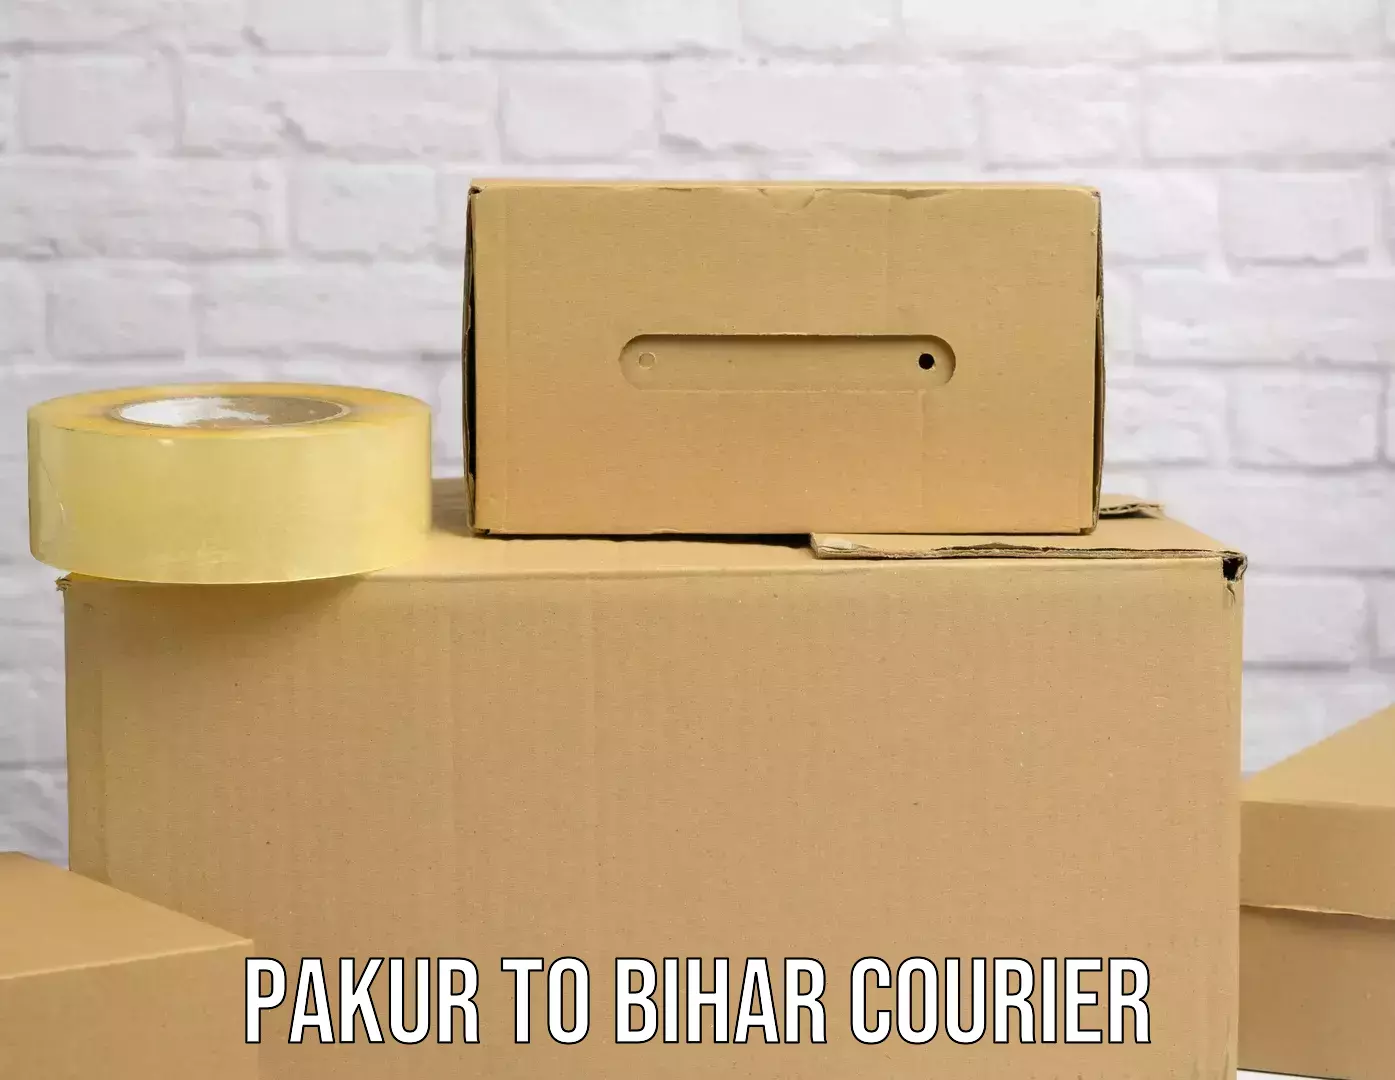 Supply chain delivery Pakur to Bihar